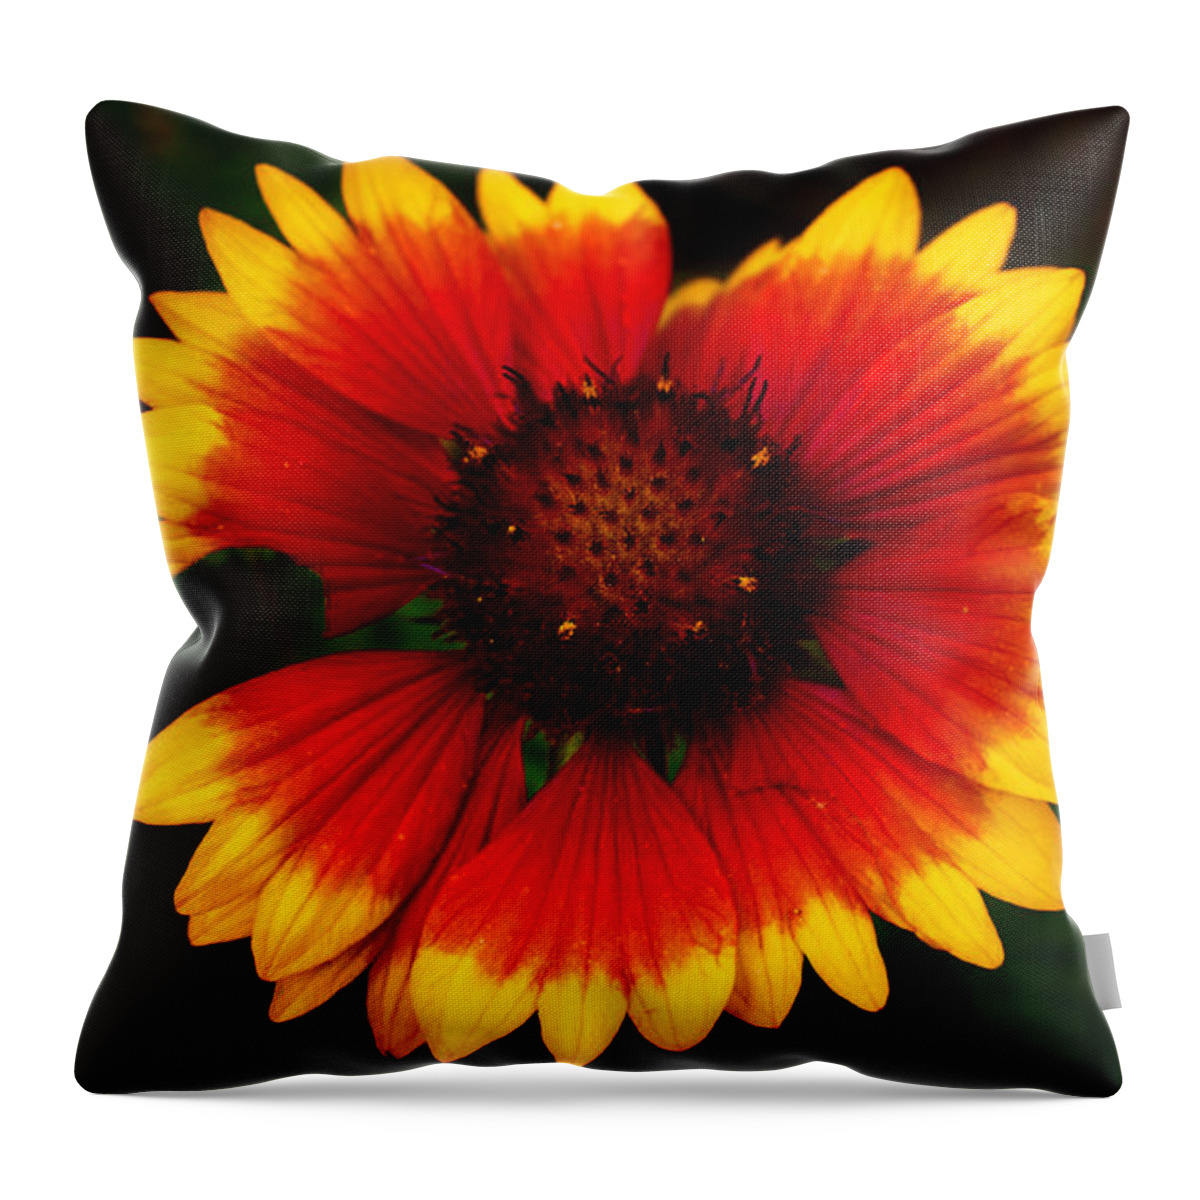 Flower Throw Pillow featuring the photograph Imperfect beauty by Milena Ilieva